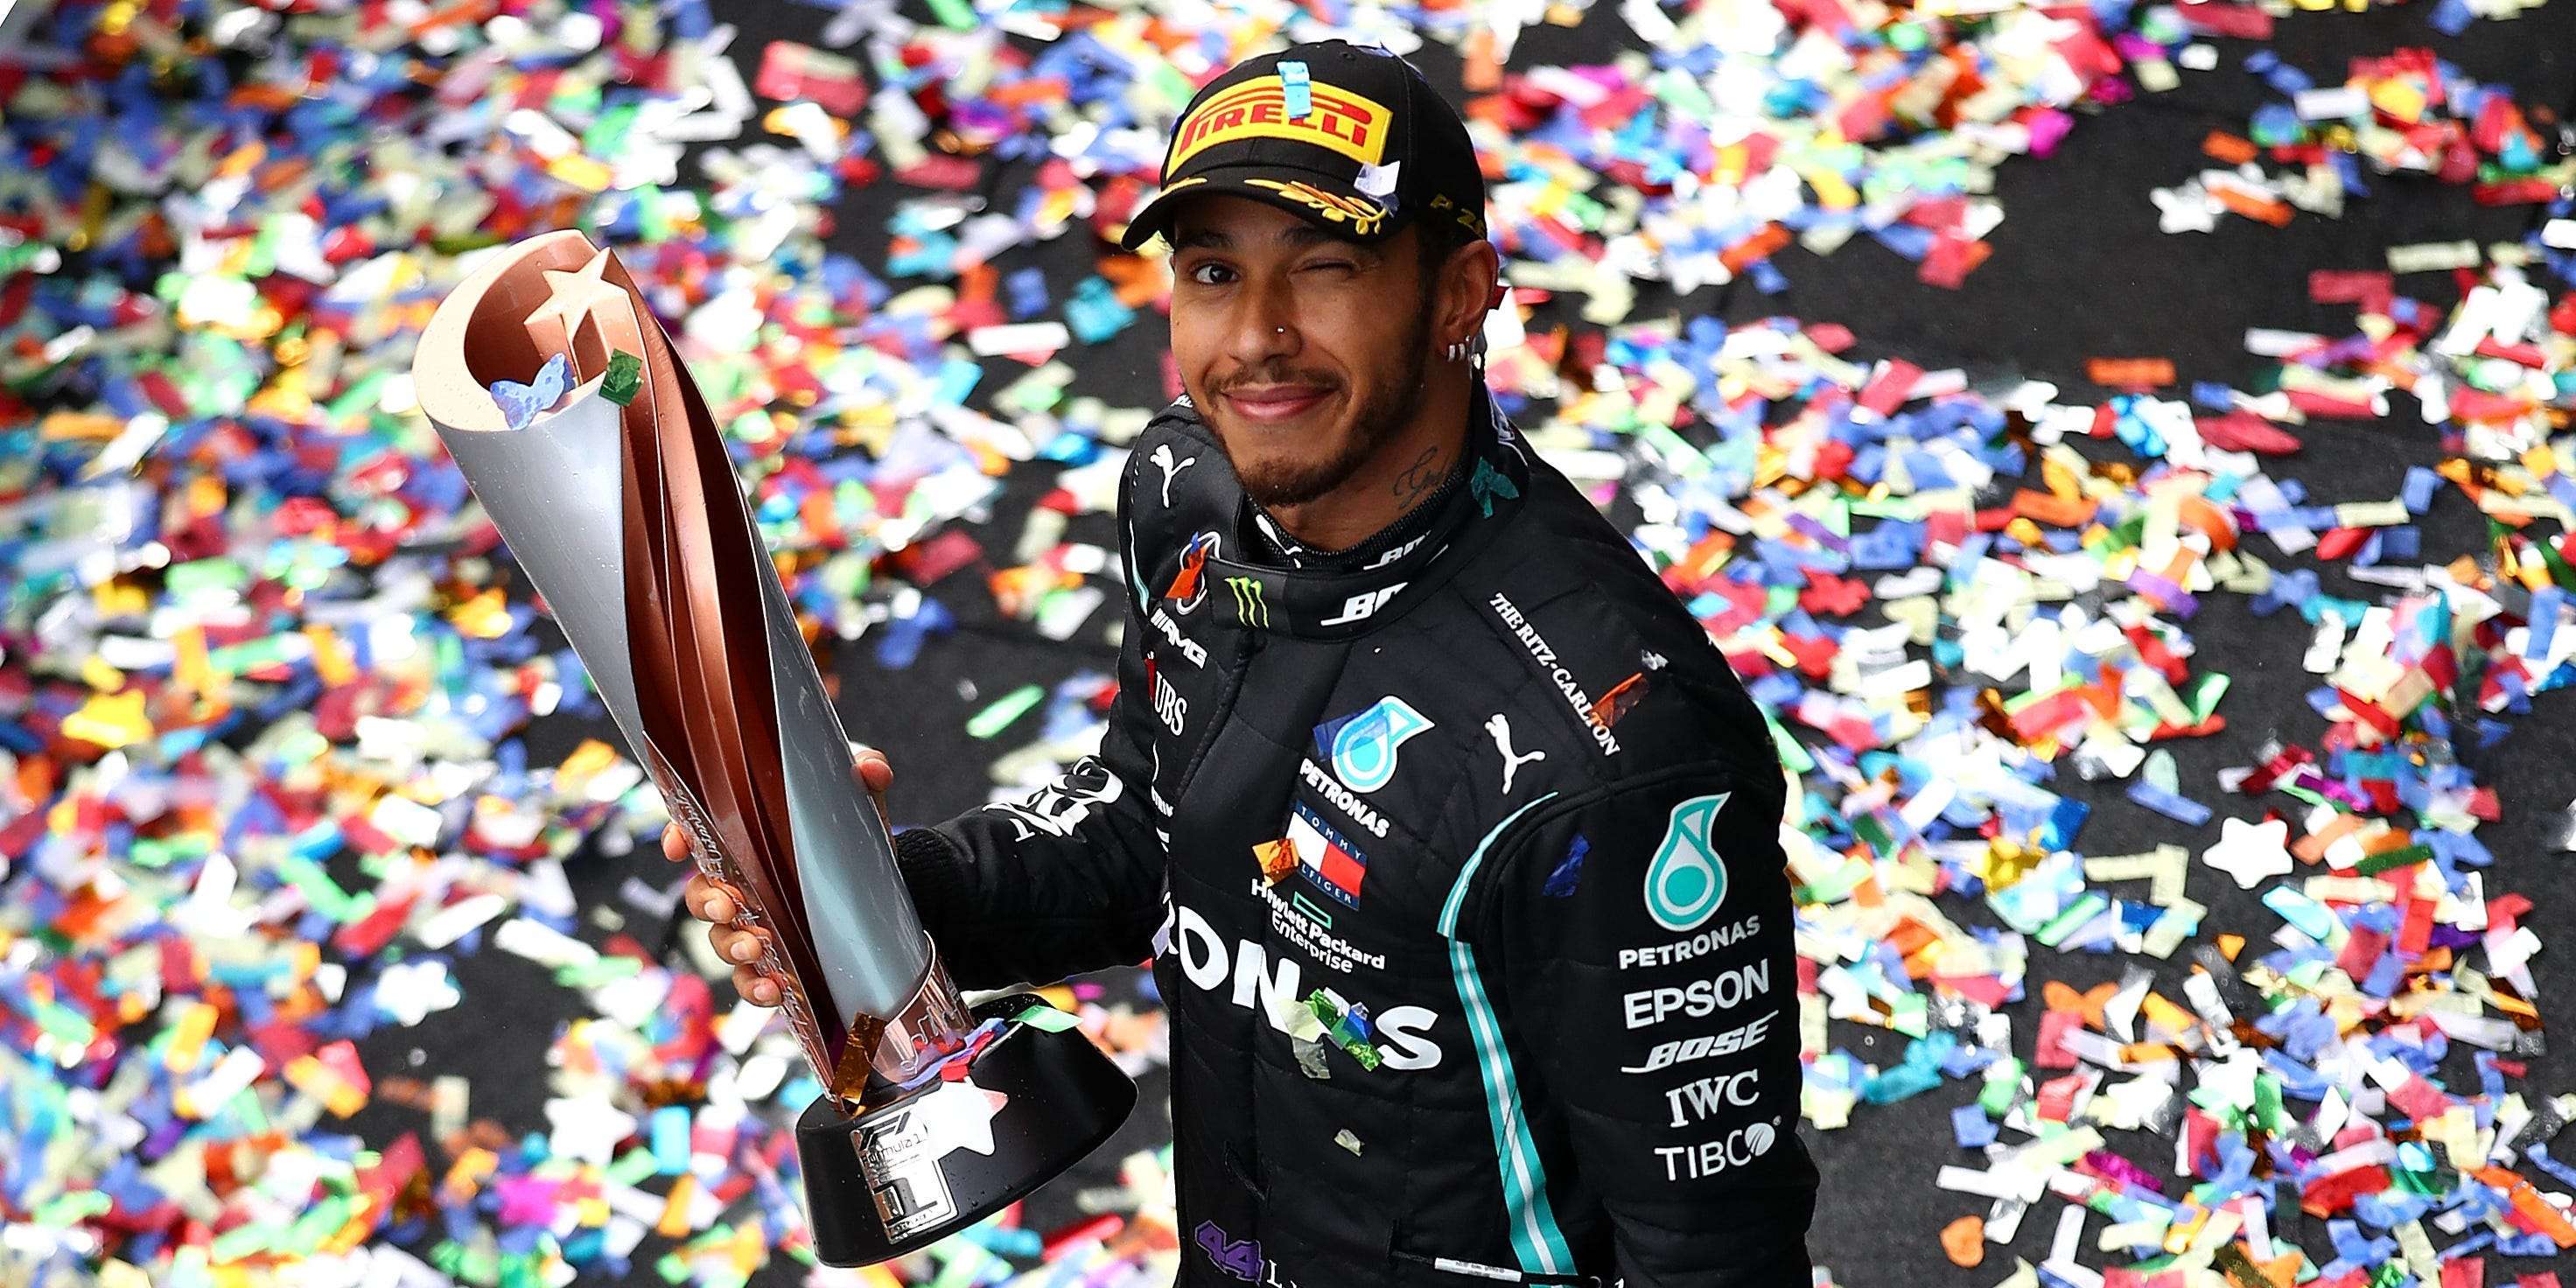 Lewis Hamilton capped off the year when he became statistically Formula